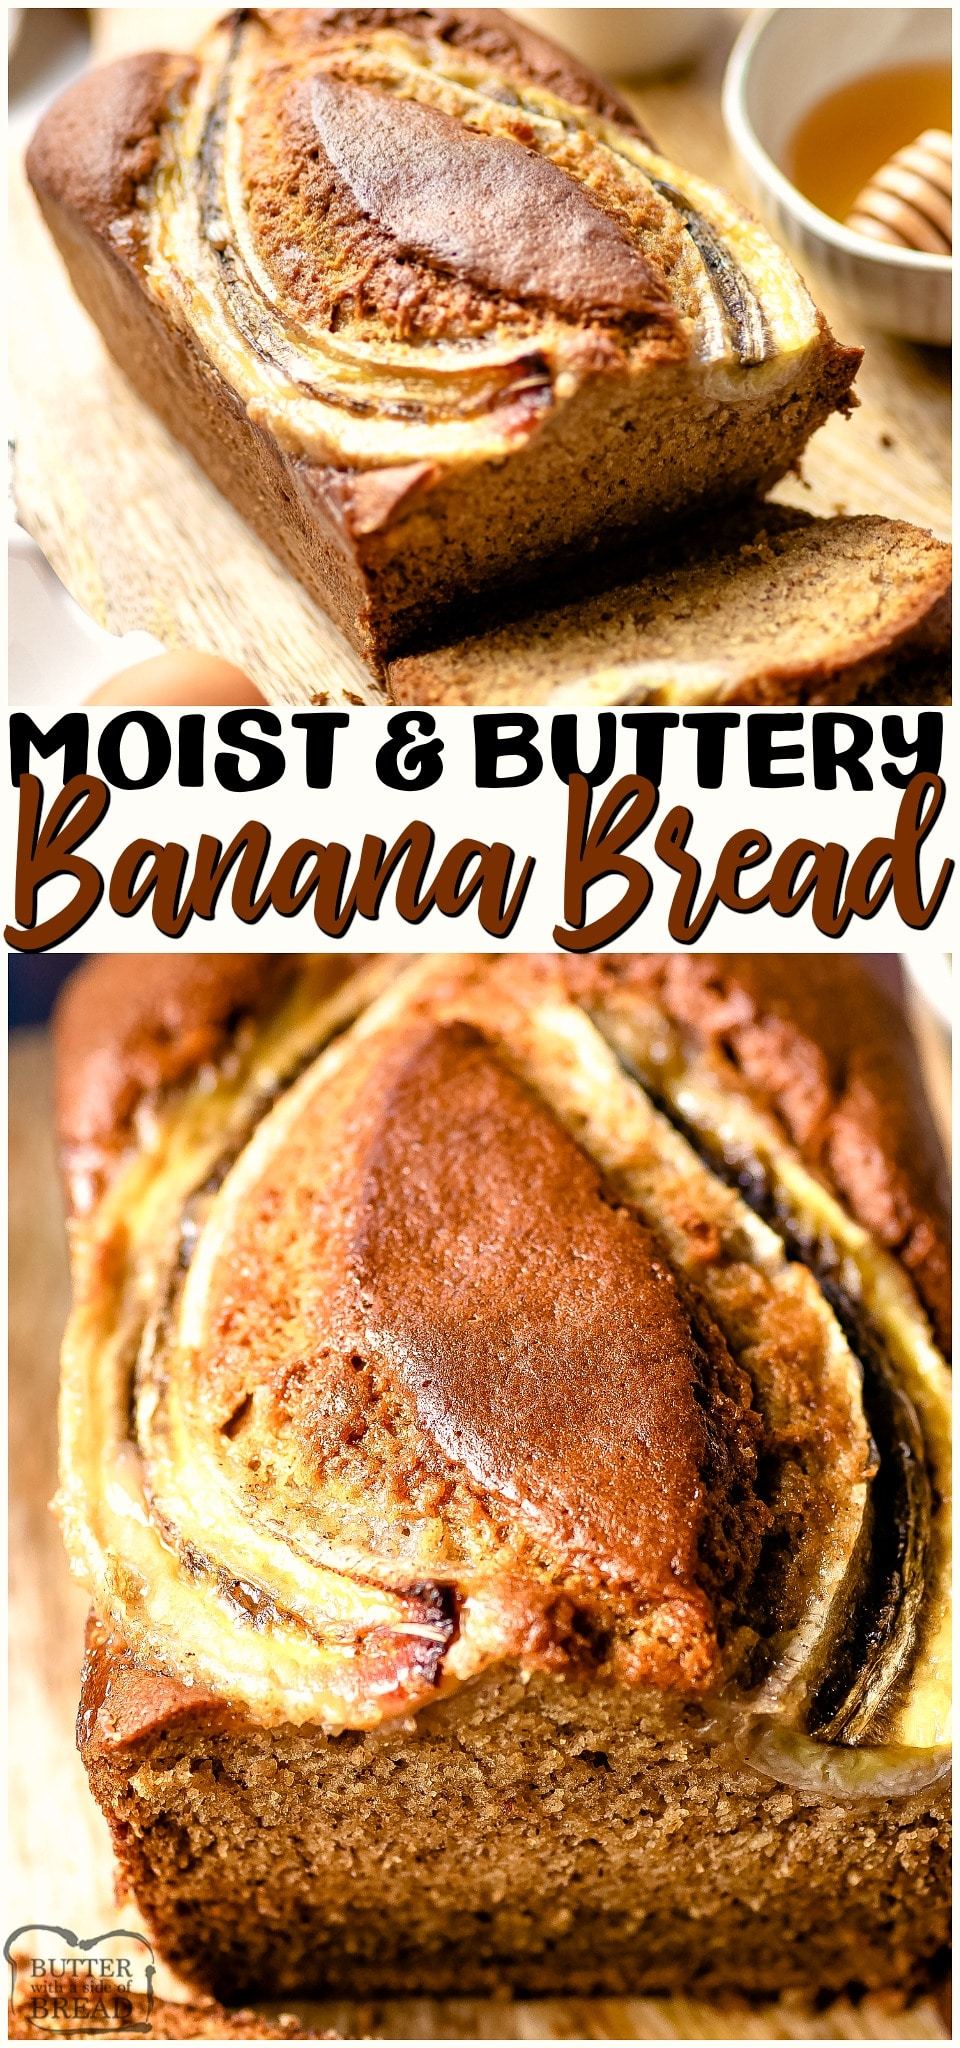 This delicious moist banana bread recipe is made with ALL butter! This makes it rich, flavorful, and mouth wateringly good. You're going to love this simple banana bread recipe! #bananas #bananabread #bread #baking #butter #moist #easyrecipe from BUTTER WITH A SIDE OF BREAD